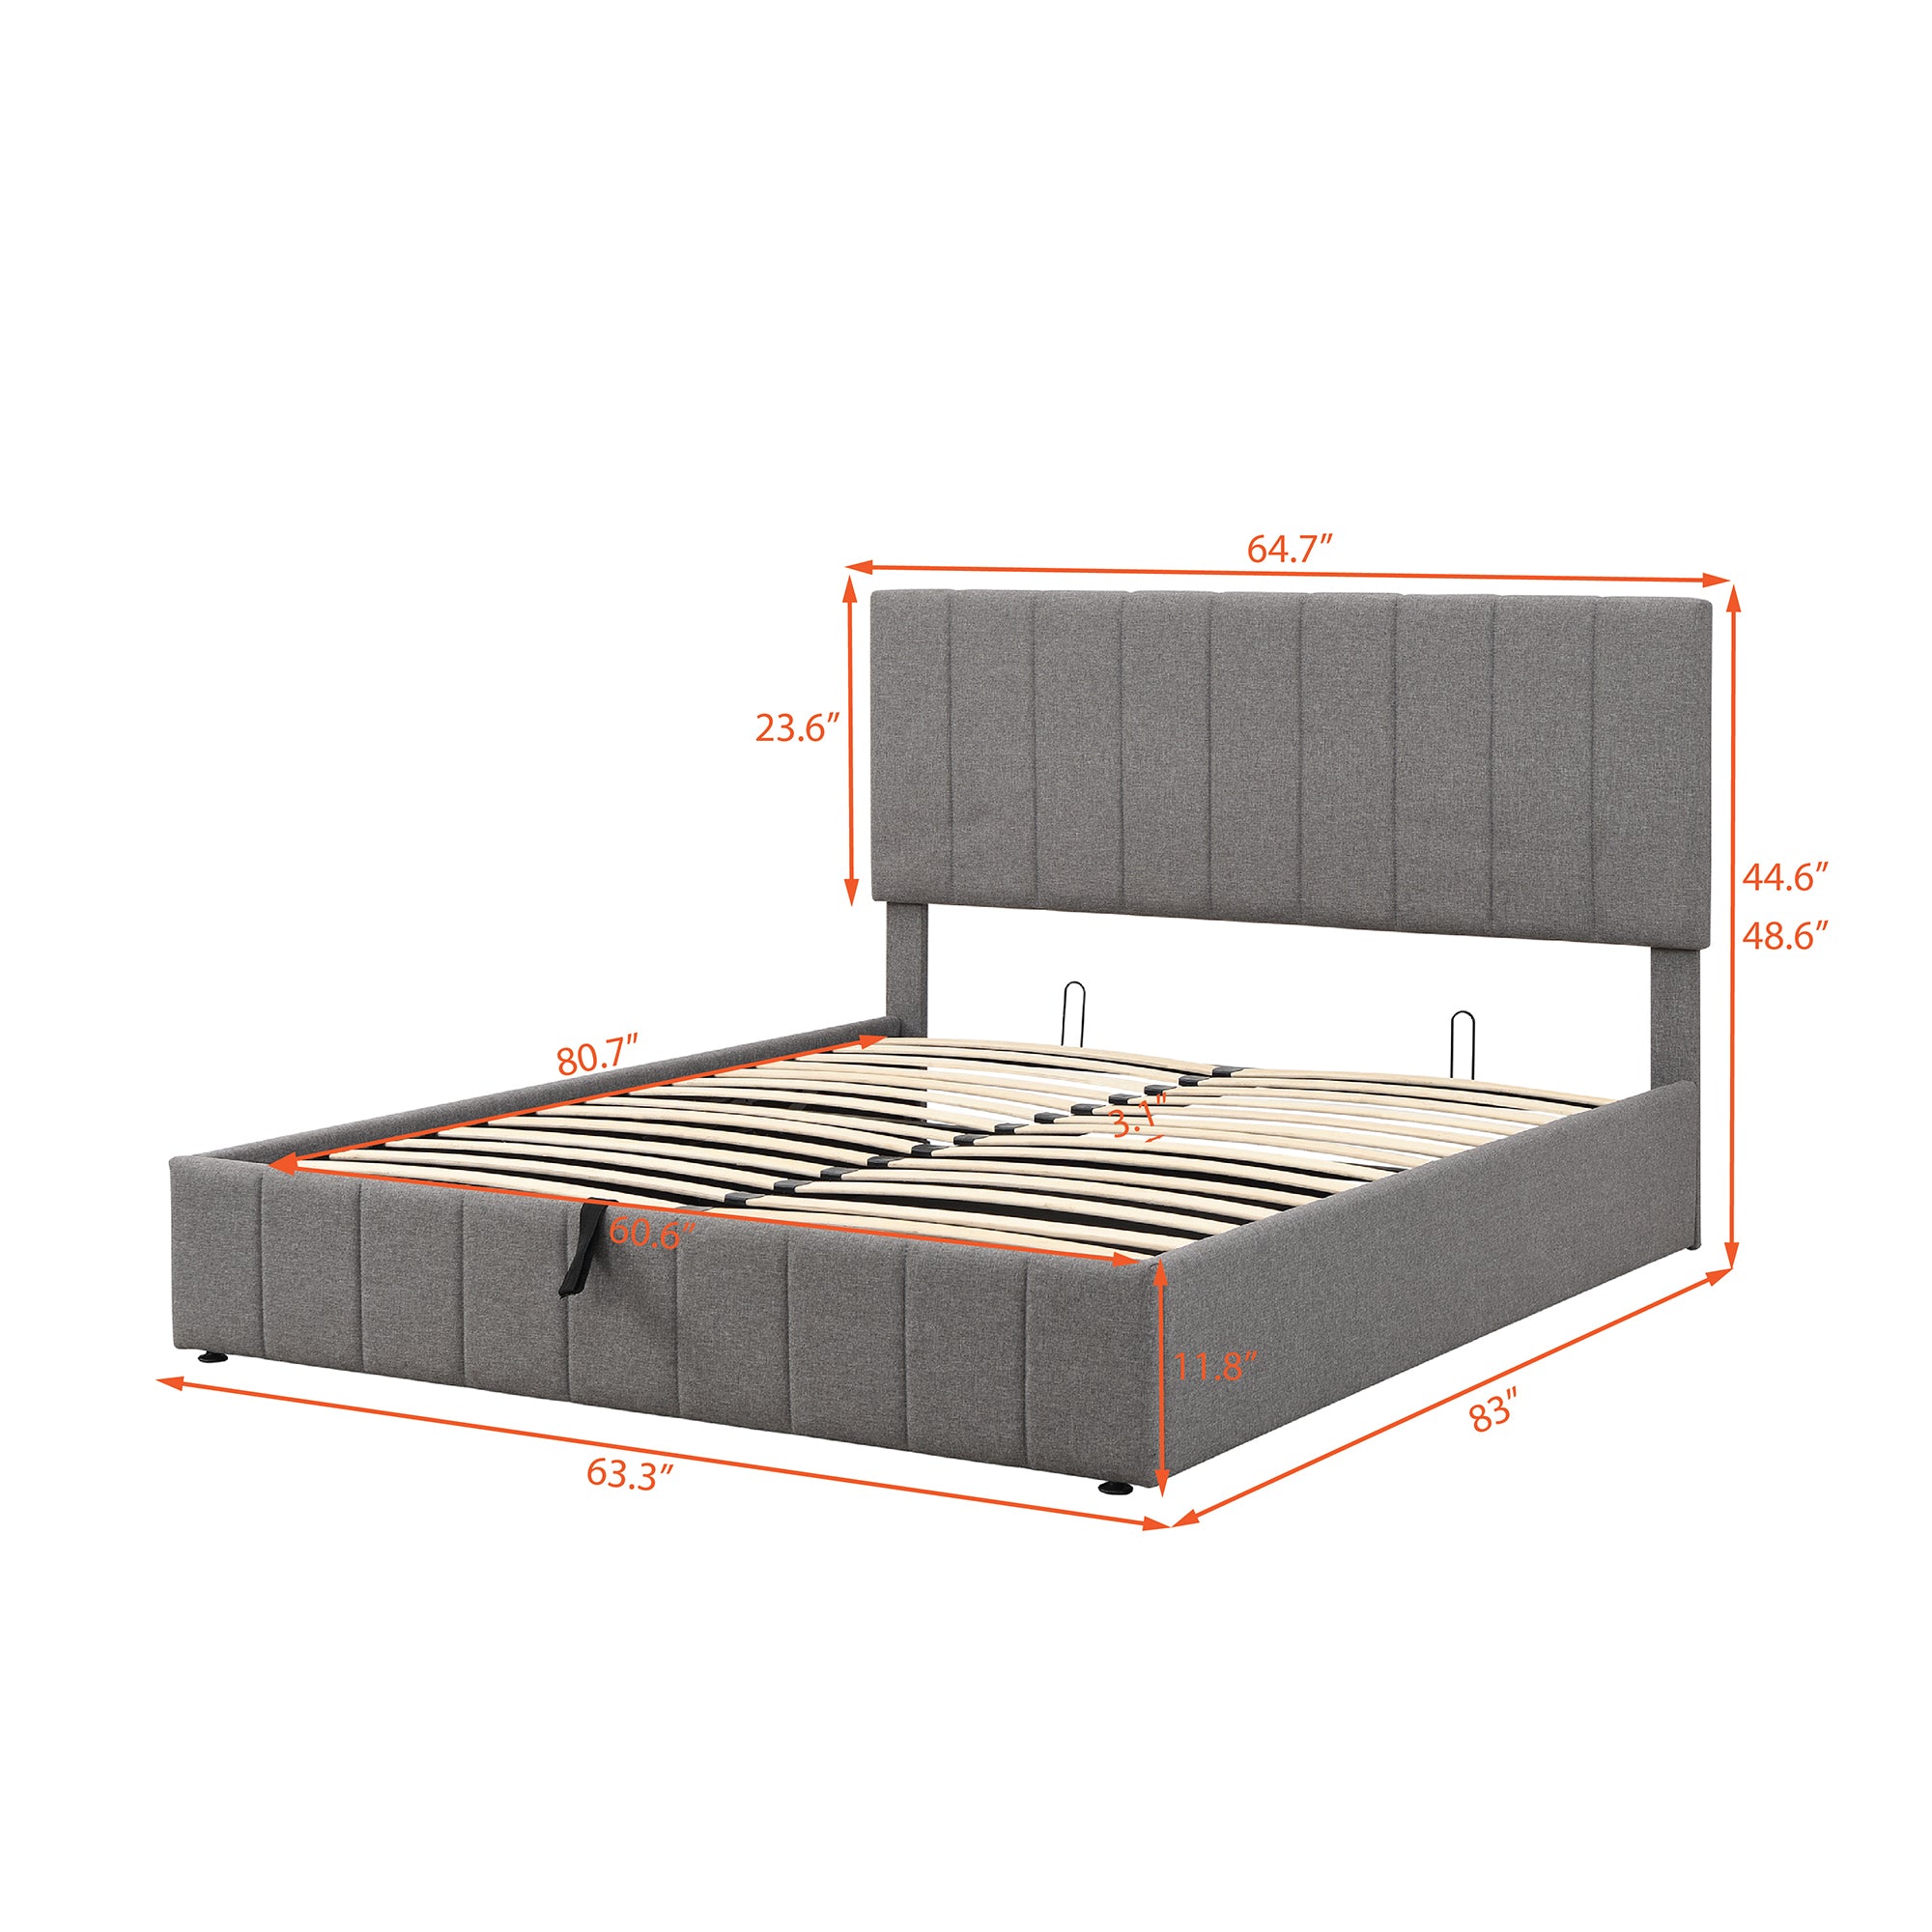 Queen Size Upholstered Platform Bed with a Hydraulic Storage System - Gray By: Alabama Beds